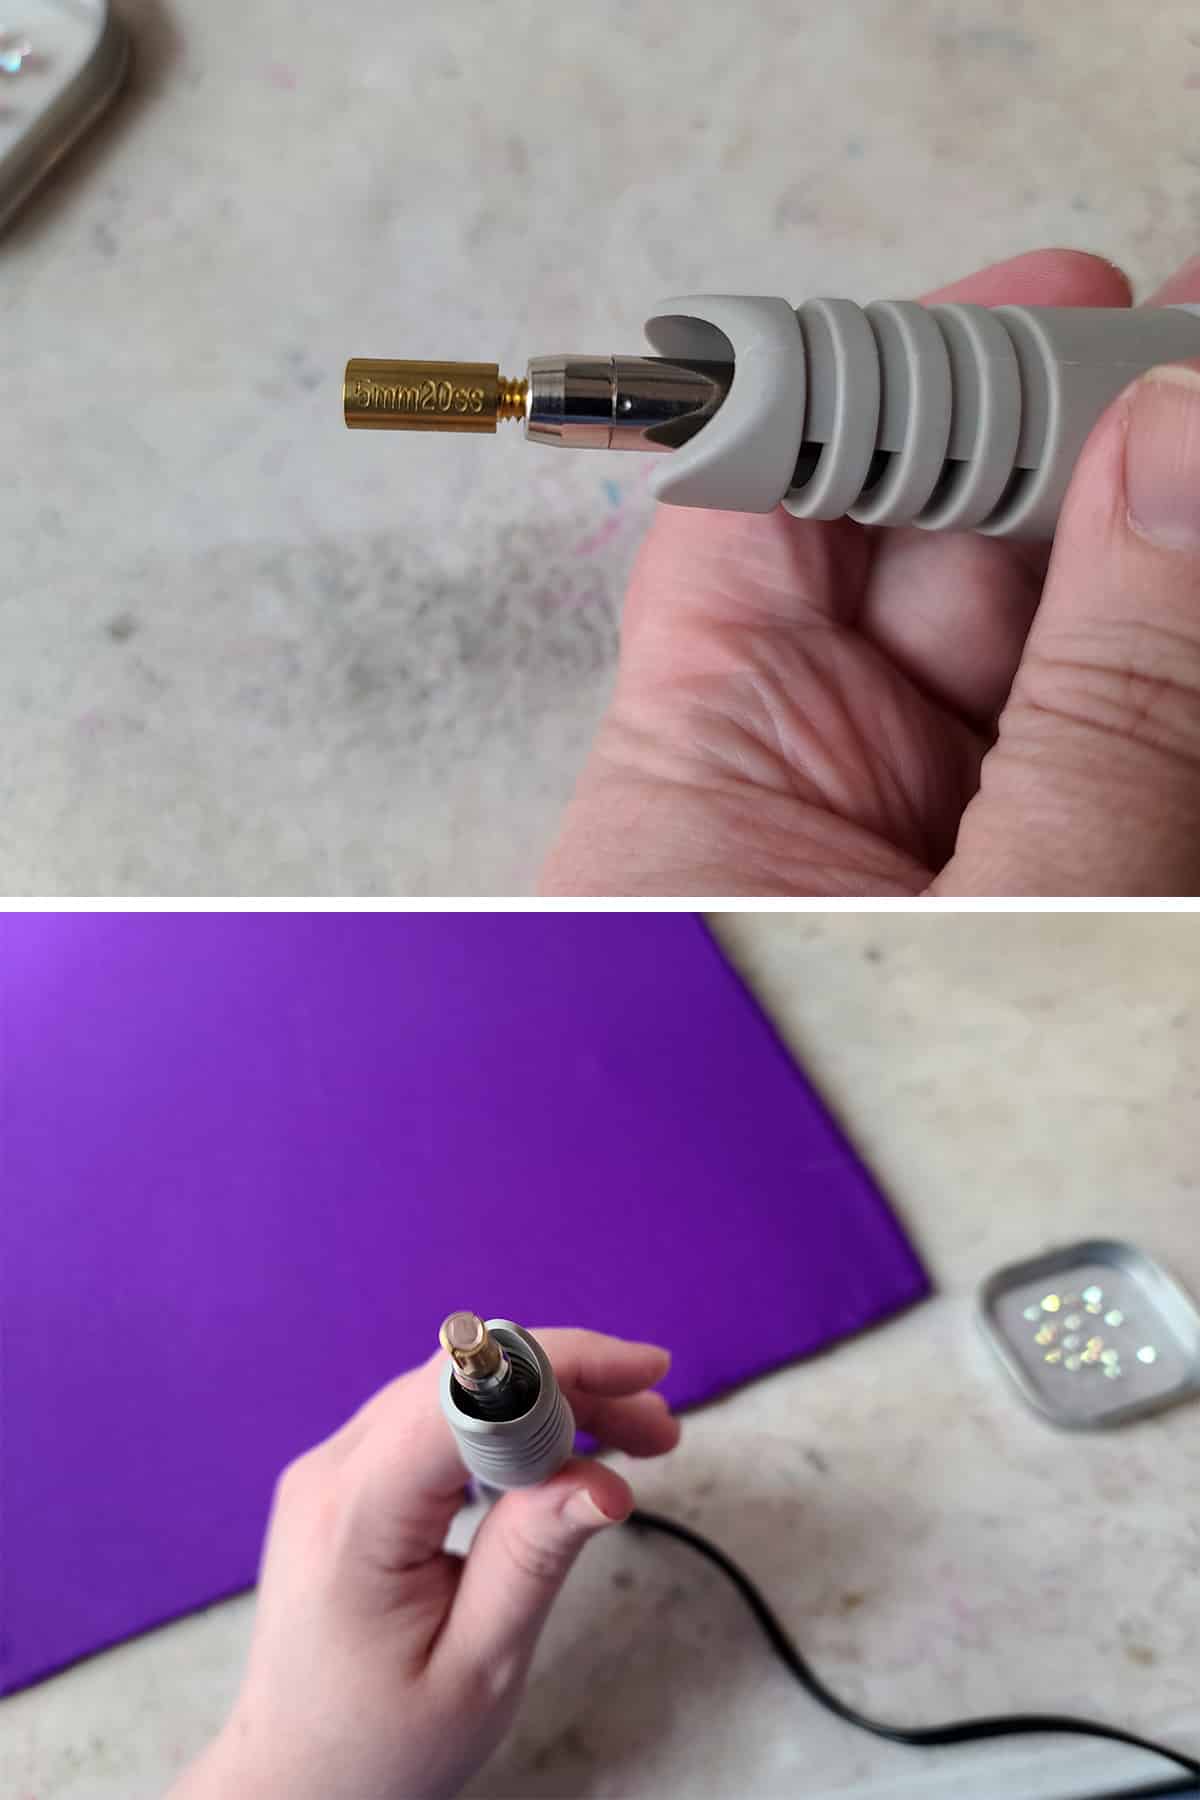 A two part compilation image showing the head of a rhinestone HotFix tool, and the tool being used with a rhinestone in it.